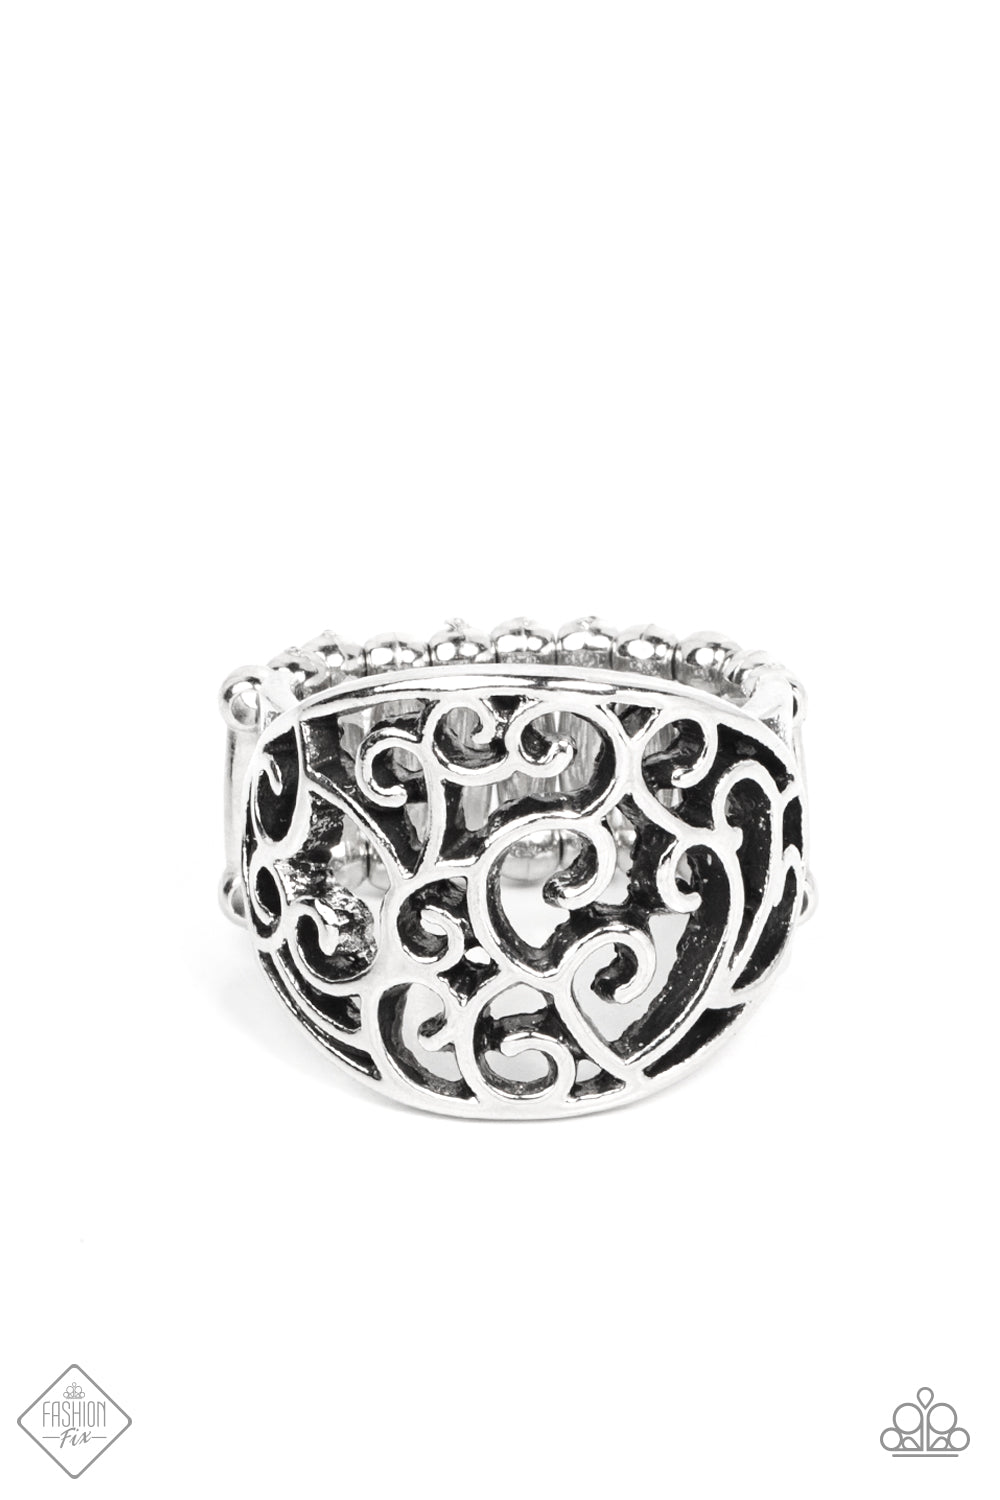 Paparazzi Accessories - Dreamy Date Night - Silver Ring - October Fashion Fix 2021 #GM1021